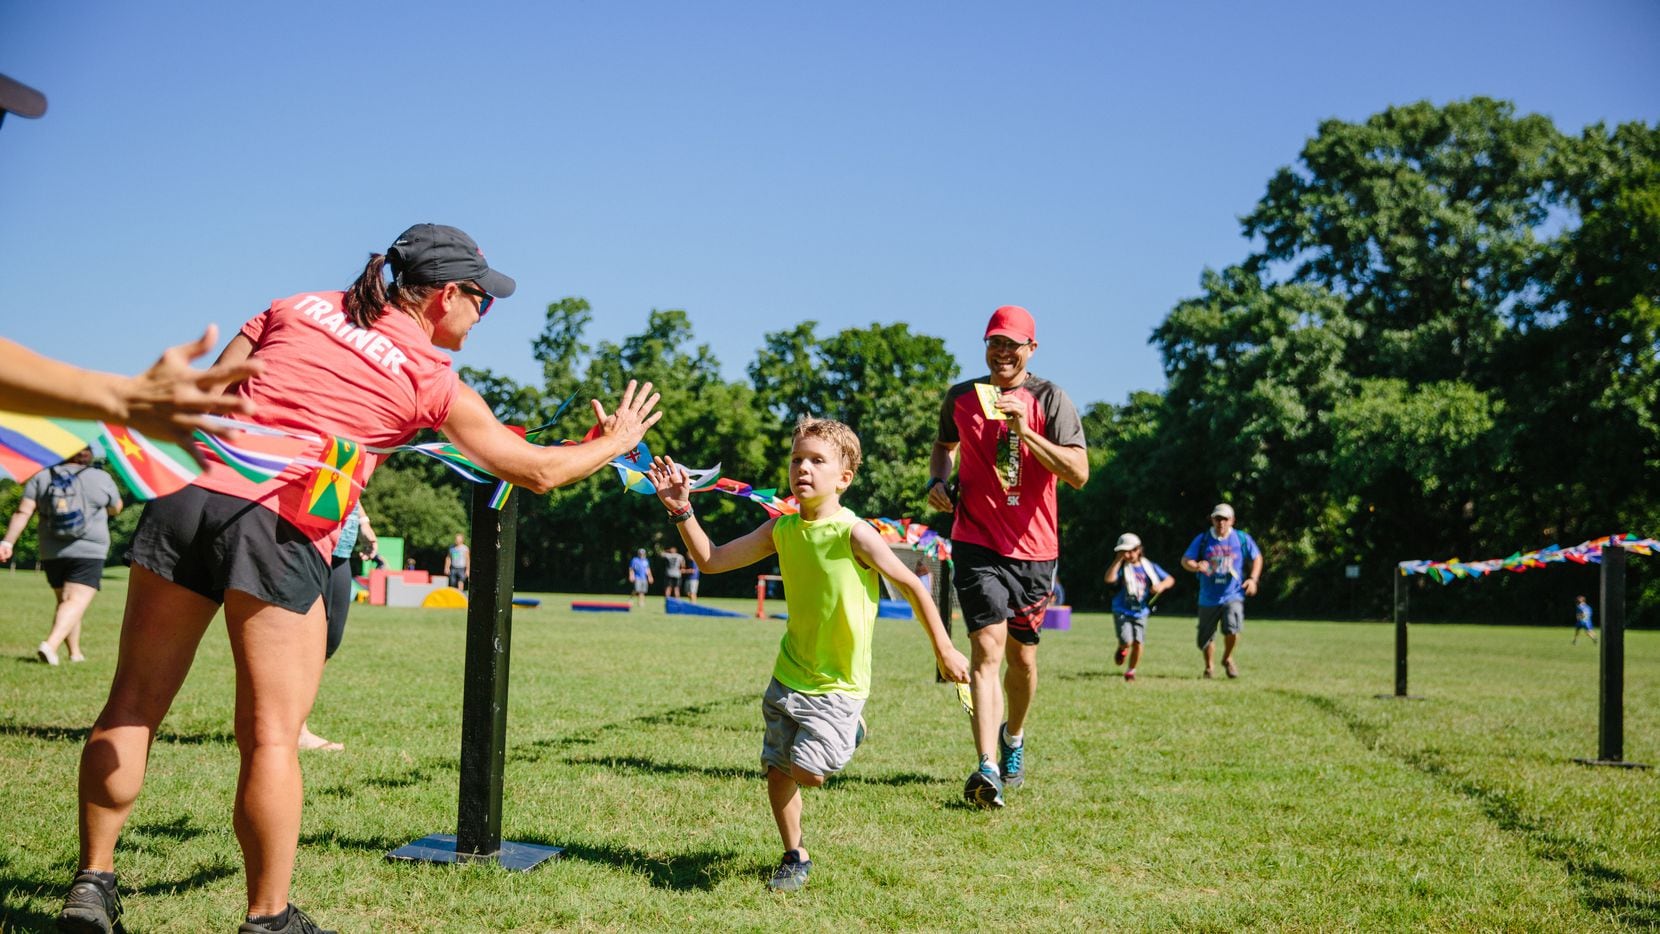 Grapevine's Father Son race is a field day event this year.